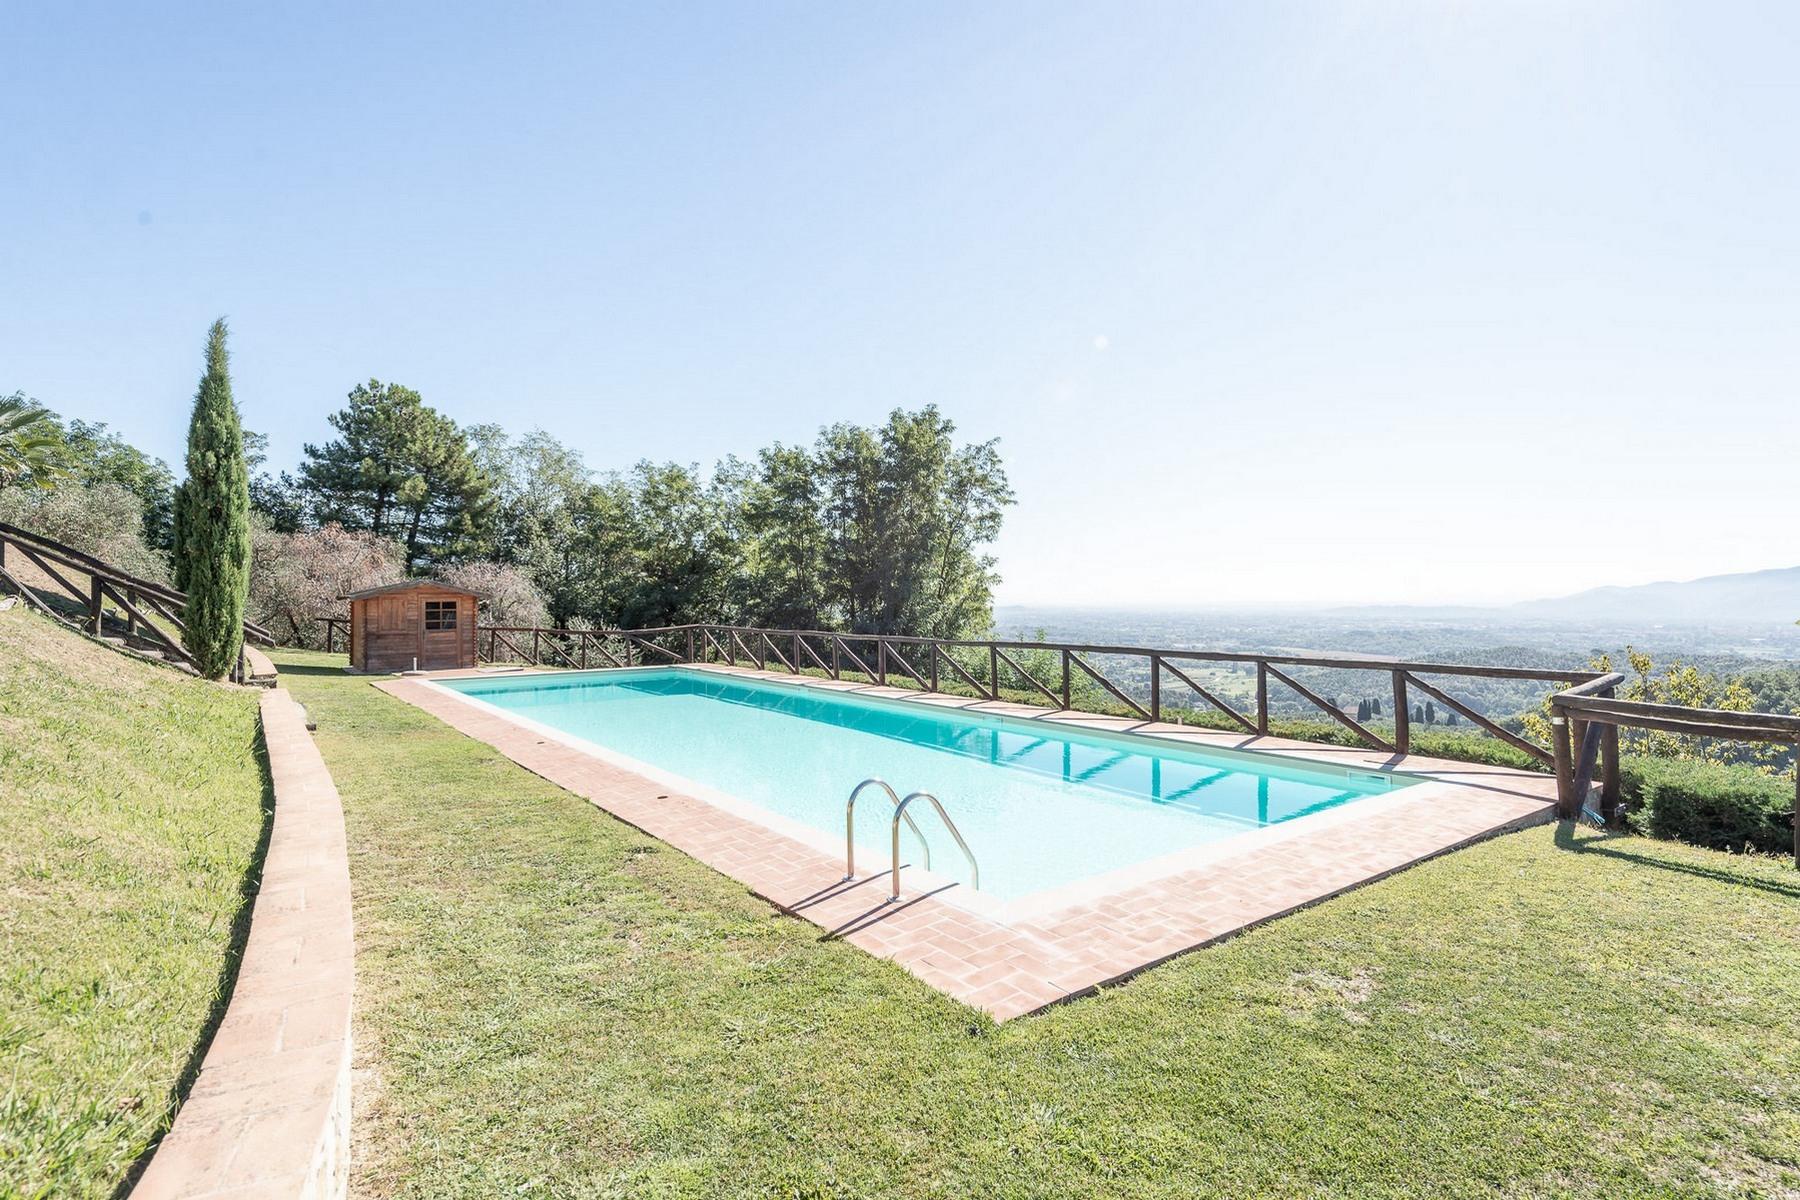 Superb villa with pool on the hills of Lucca - 3